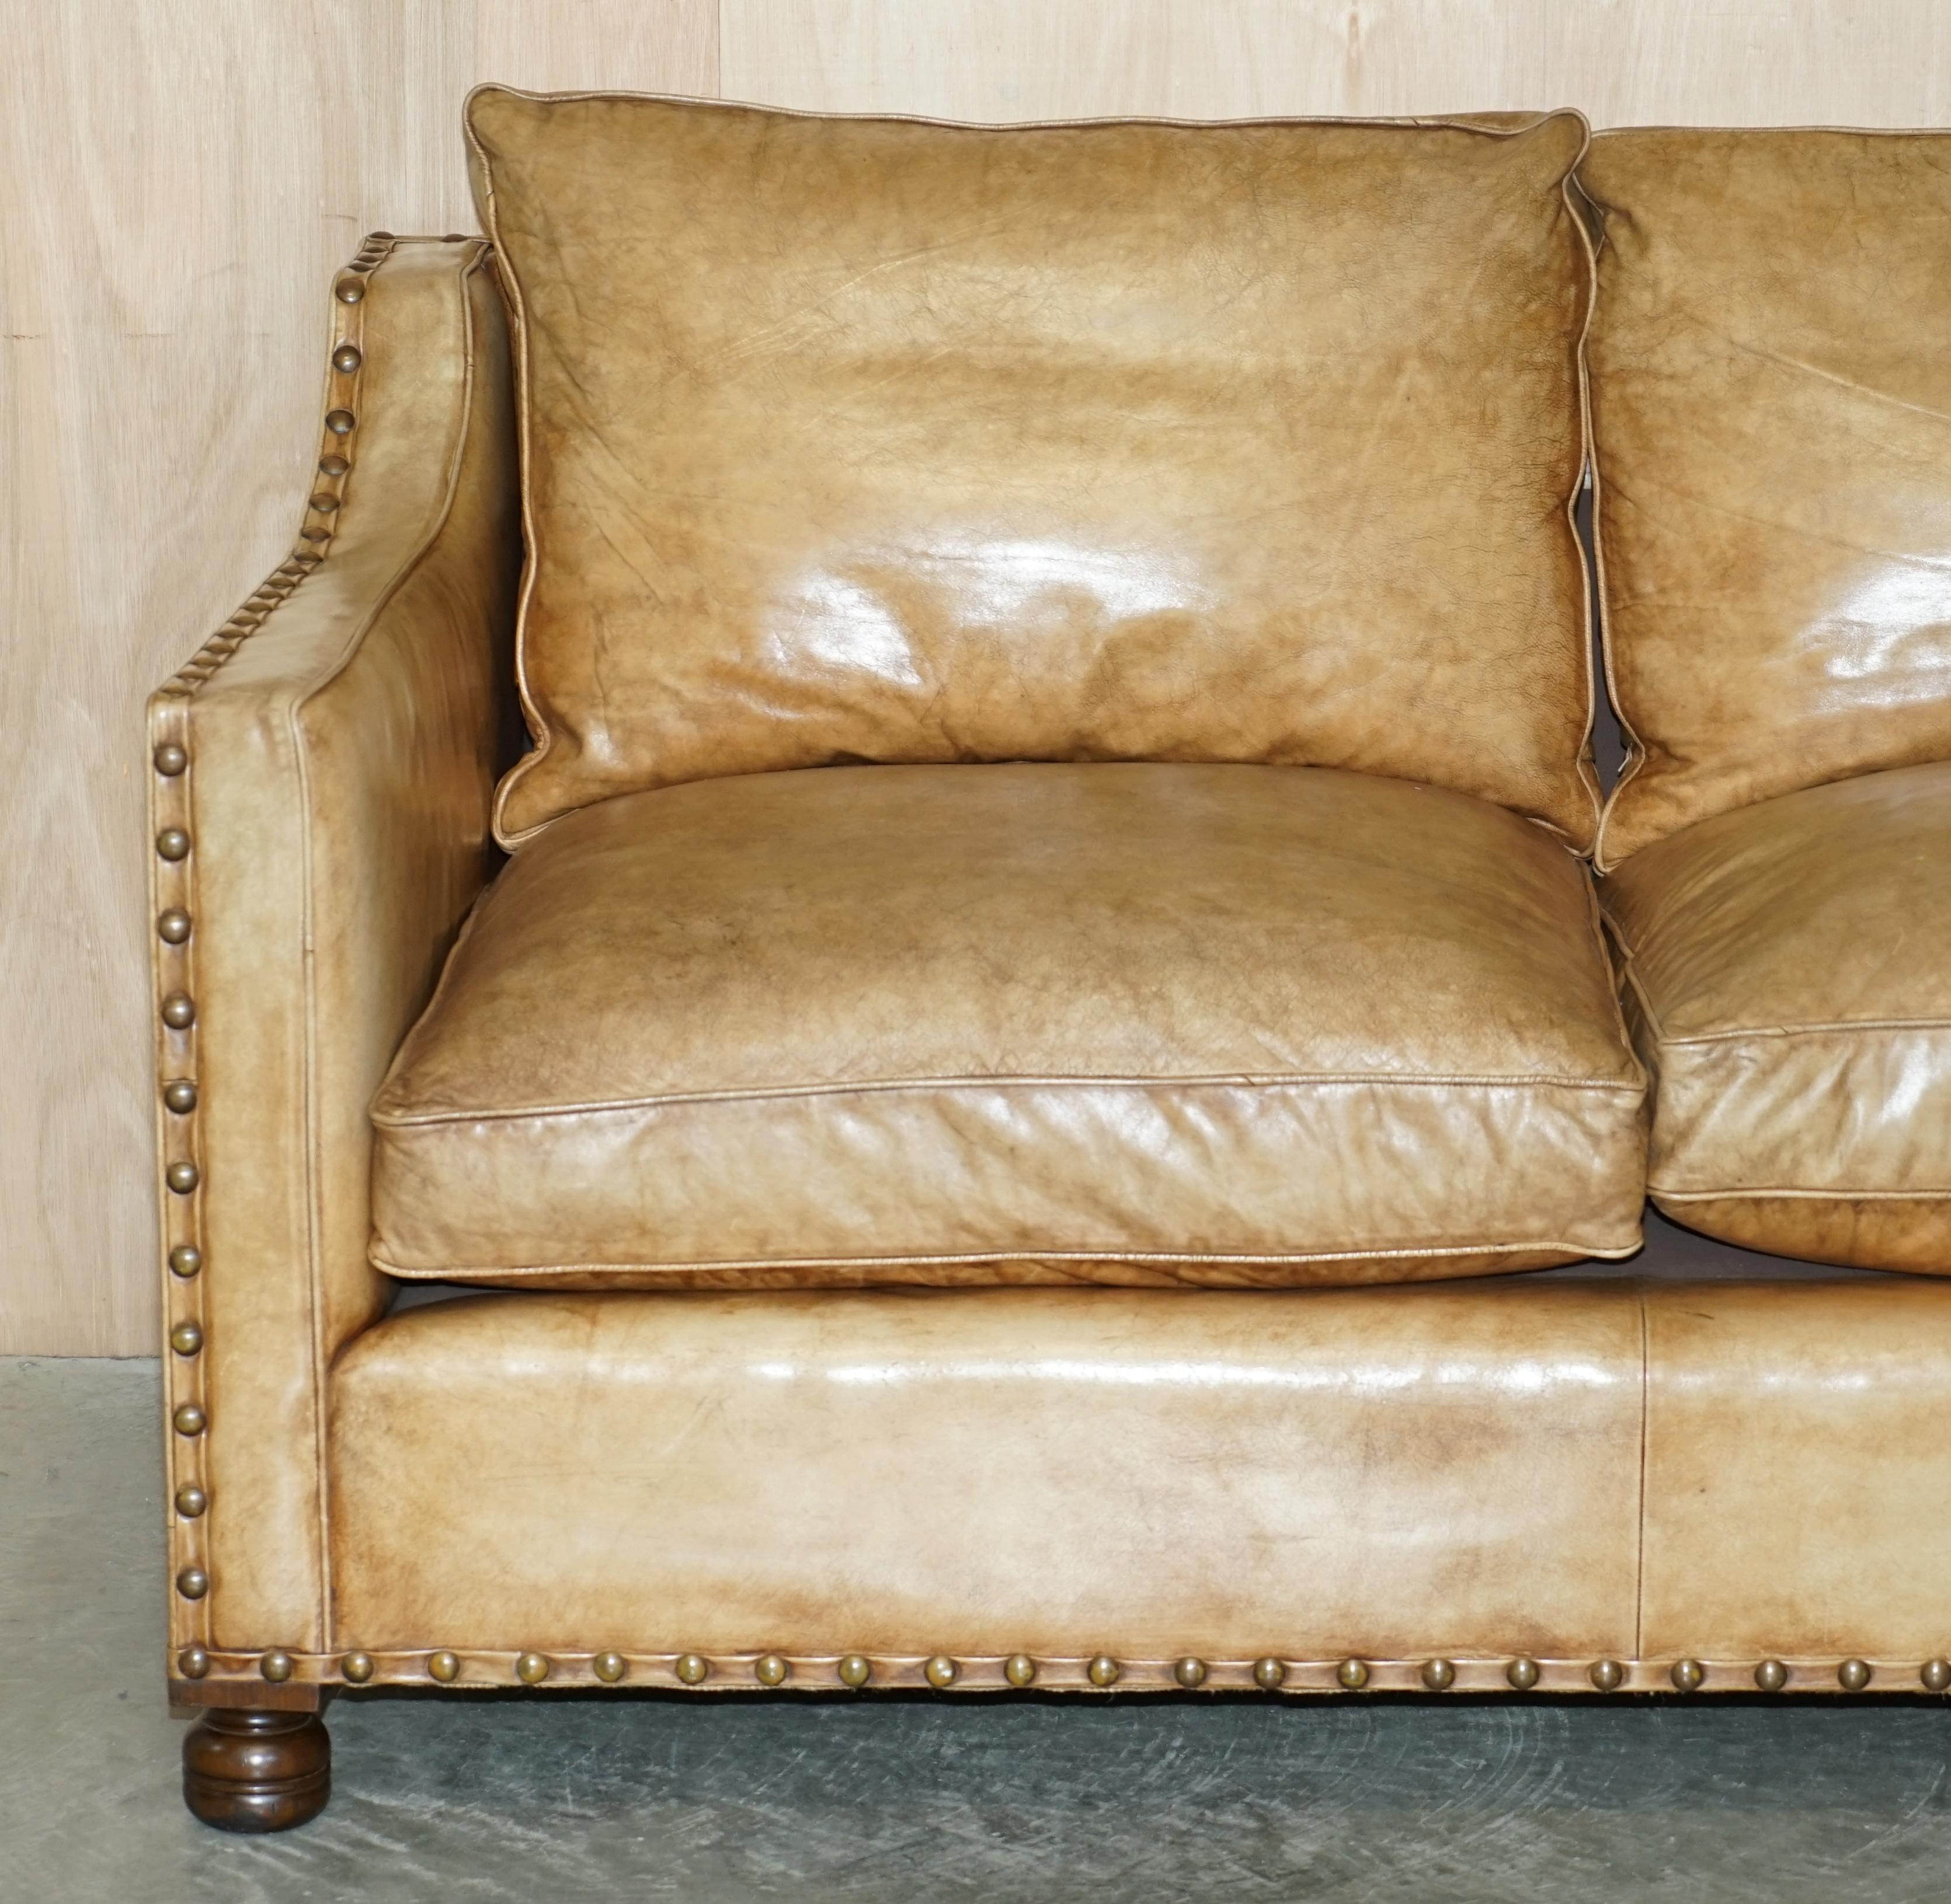 Hand-Crafted Lovely Hand Dyed Heritage Brown Leather Edwardian Style Studded Two Seat Sofa For Sale